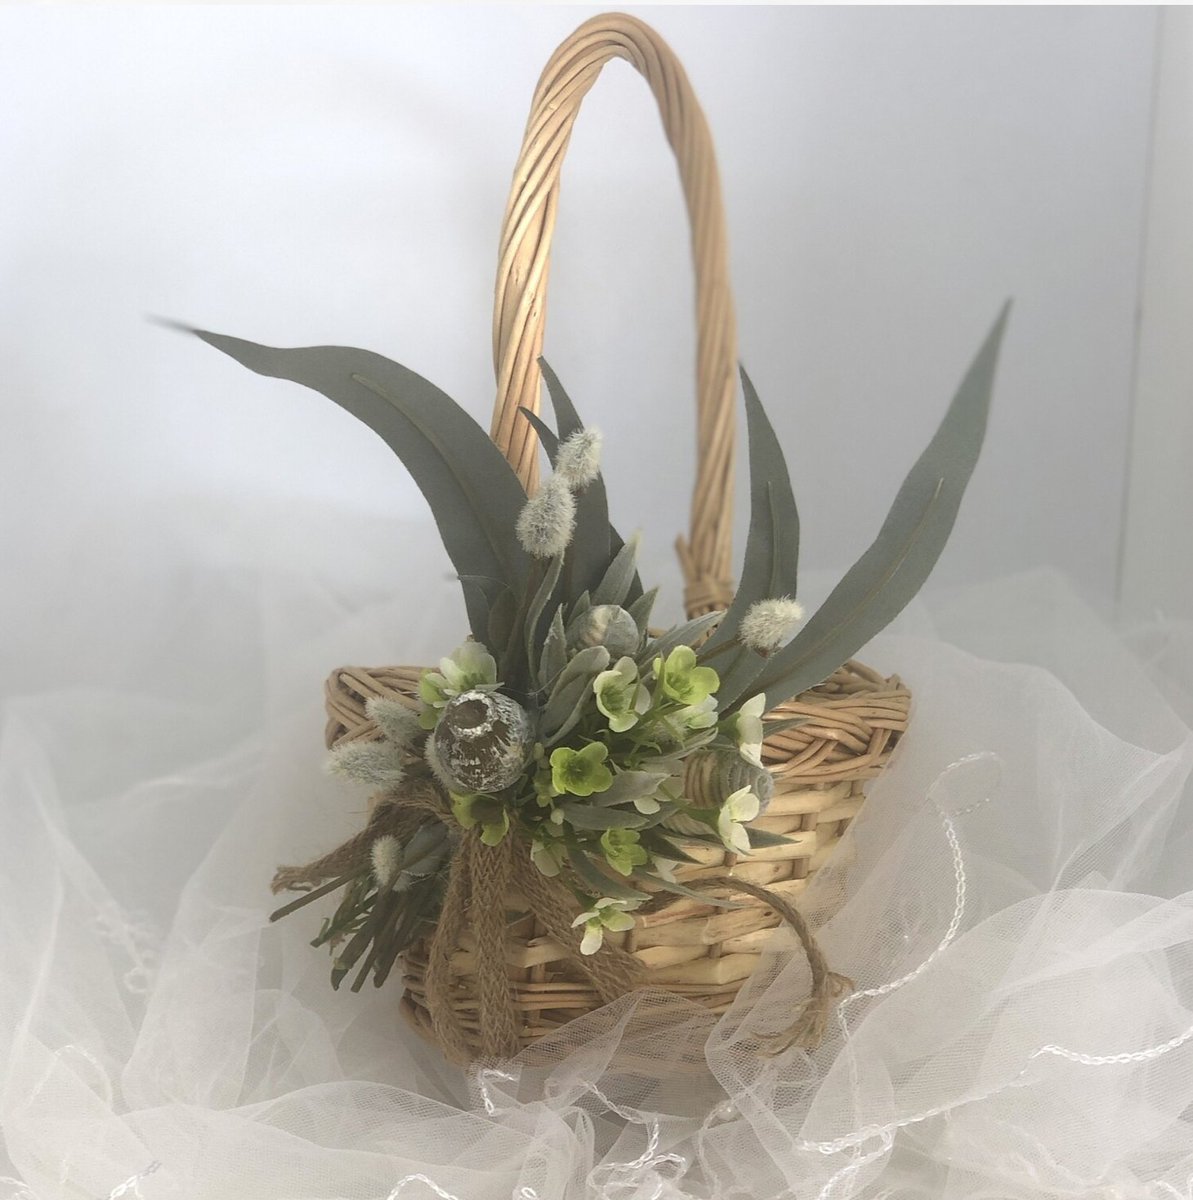 NATALIE is a Fabulous Flower Girl Basket with some native flowers just perfect for a rustic wedding bejewelledbridal.com.au/online-store
#flowergirl #flowergirls #flowergirlbasket #rusticwedding #rusticweddingdecor #rusticweddings #weddingaccessories #weddingaccesories #weddingaccessory